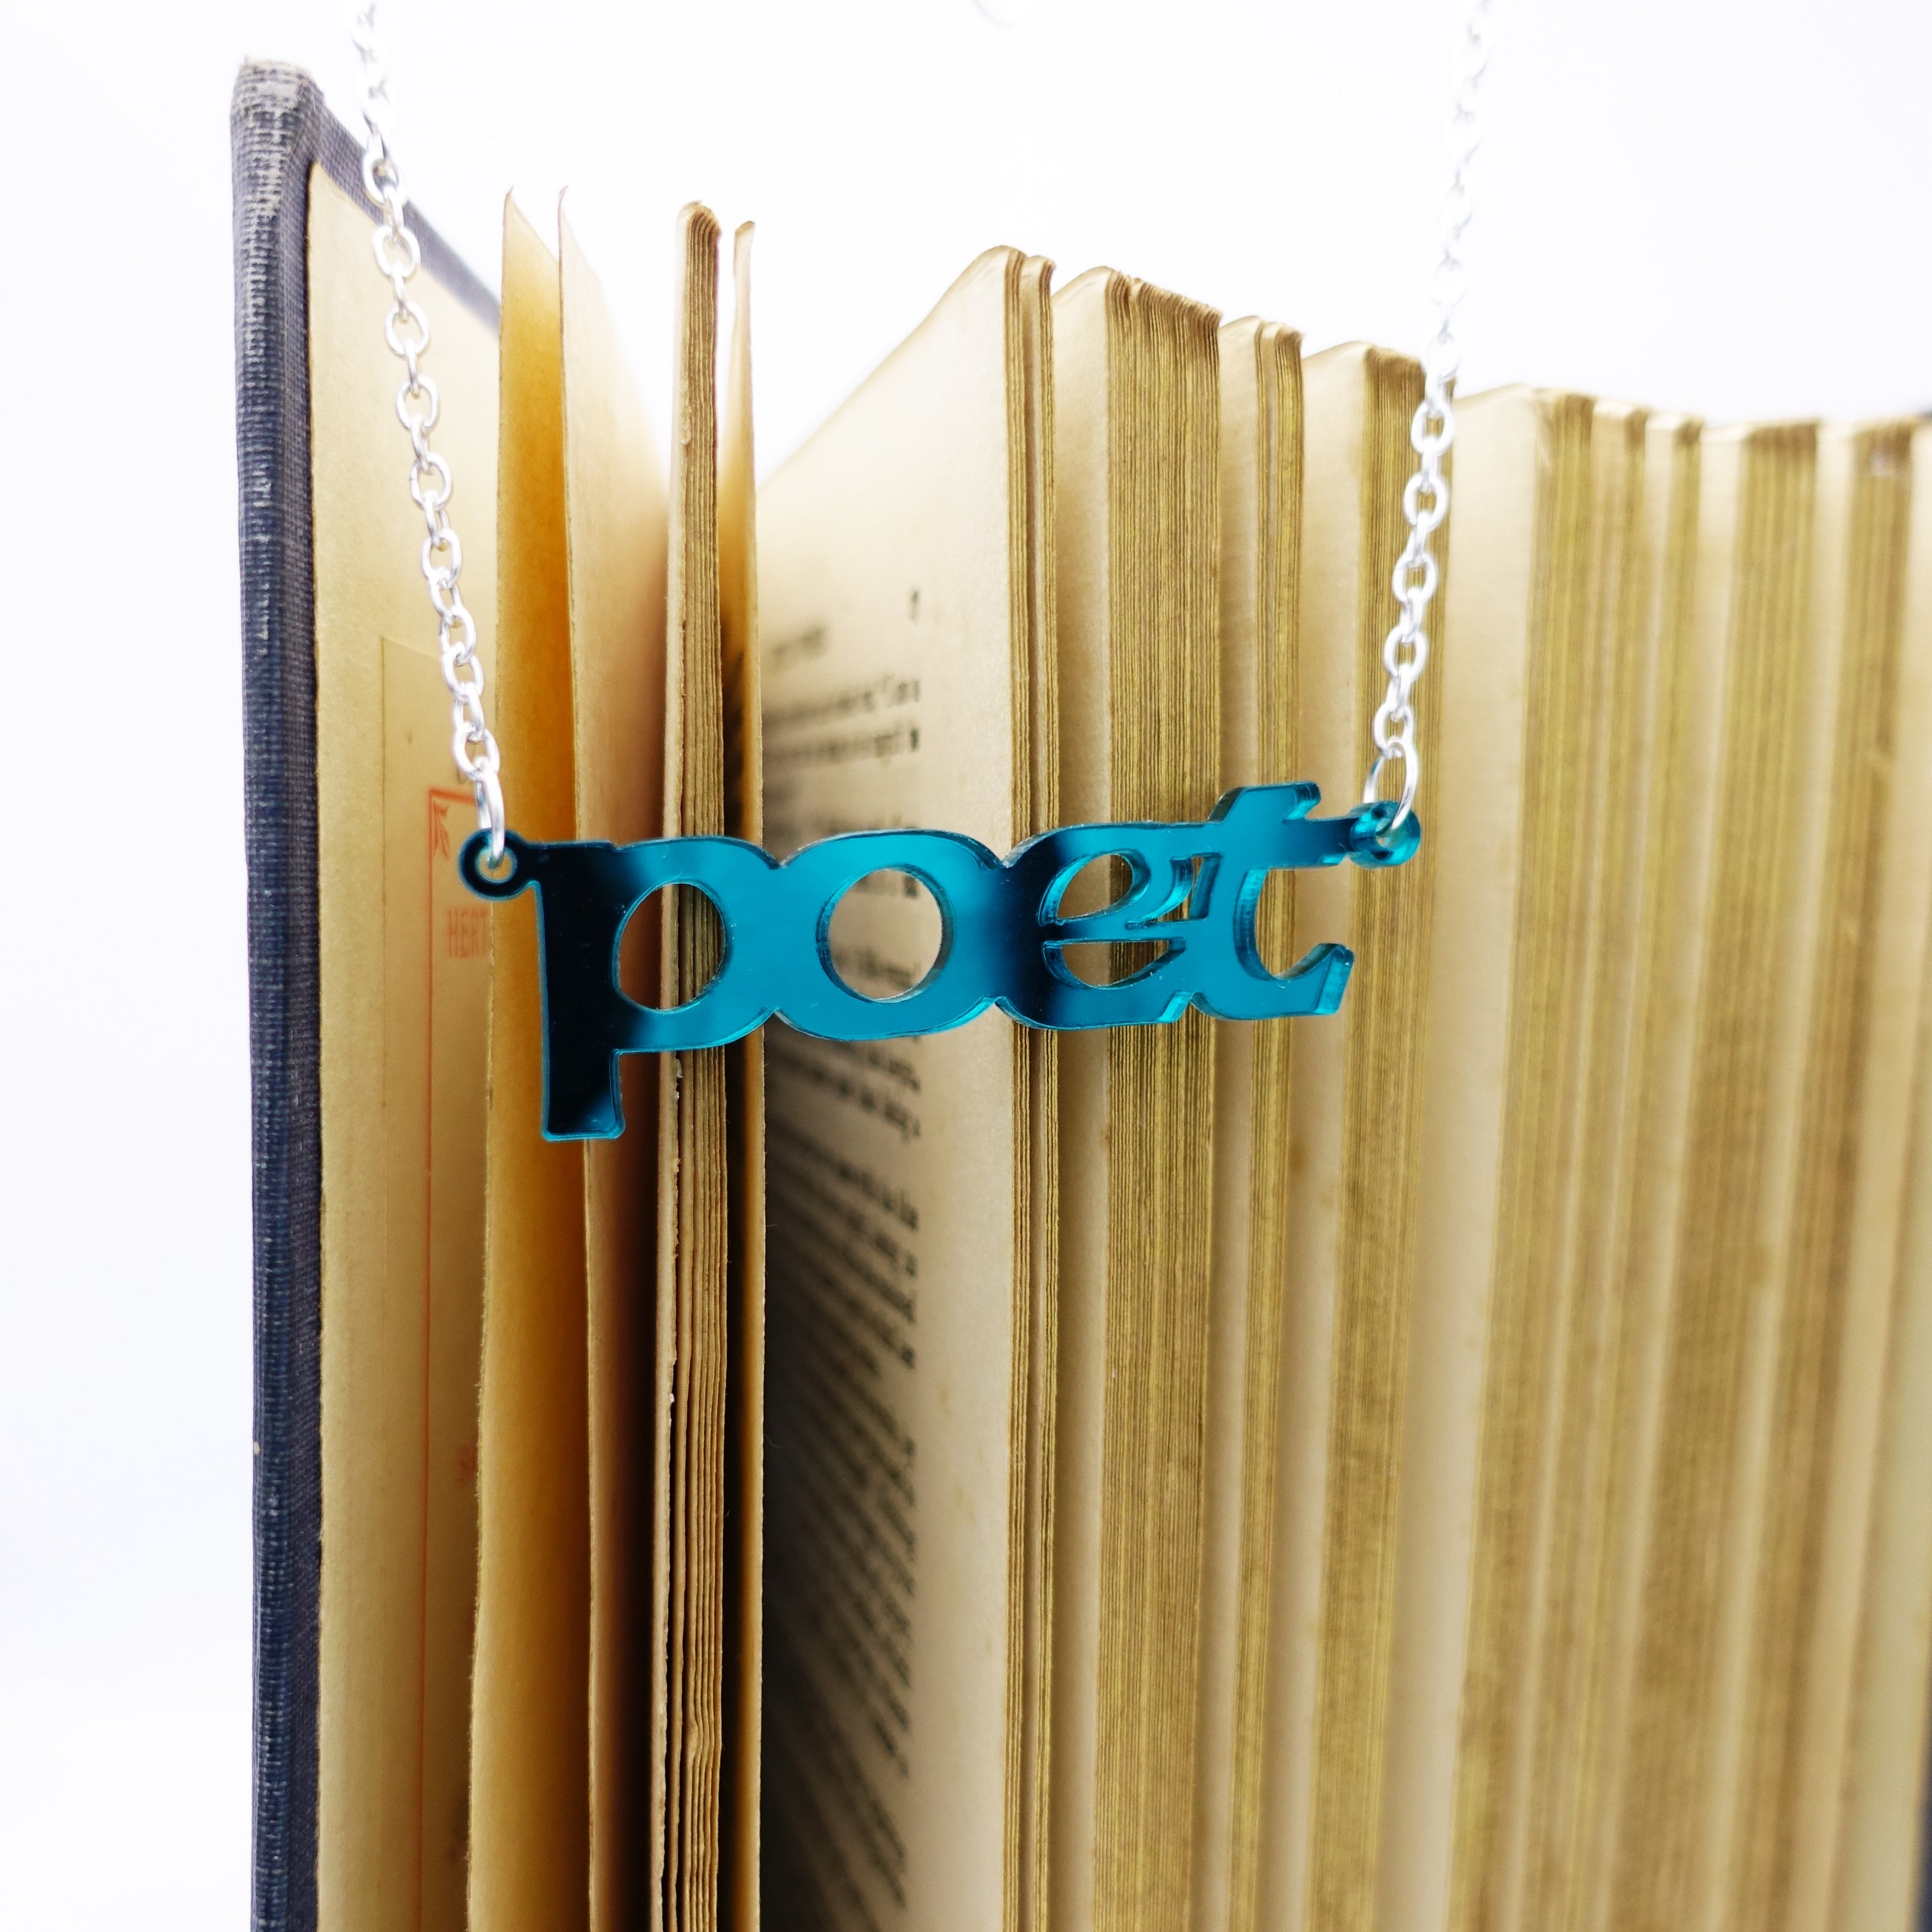 Poet necklace in teal mirror shown hanging with a book. 